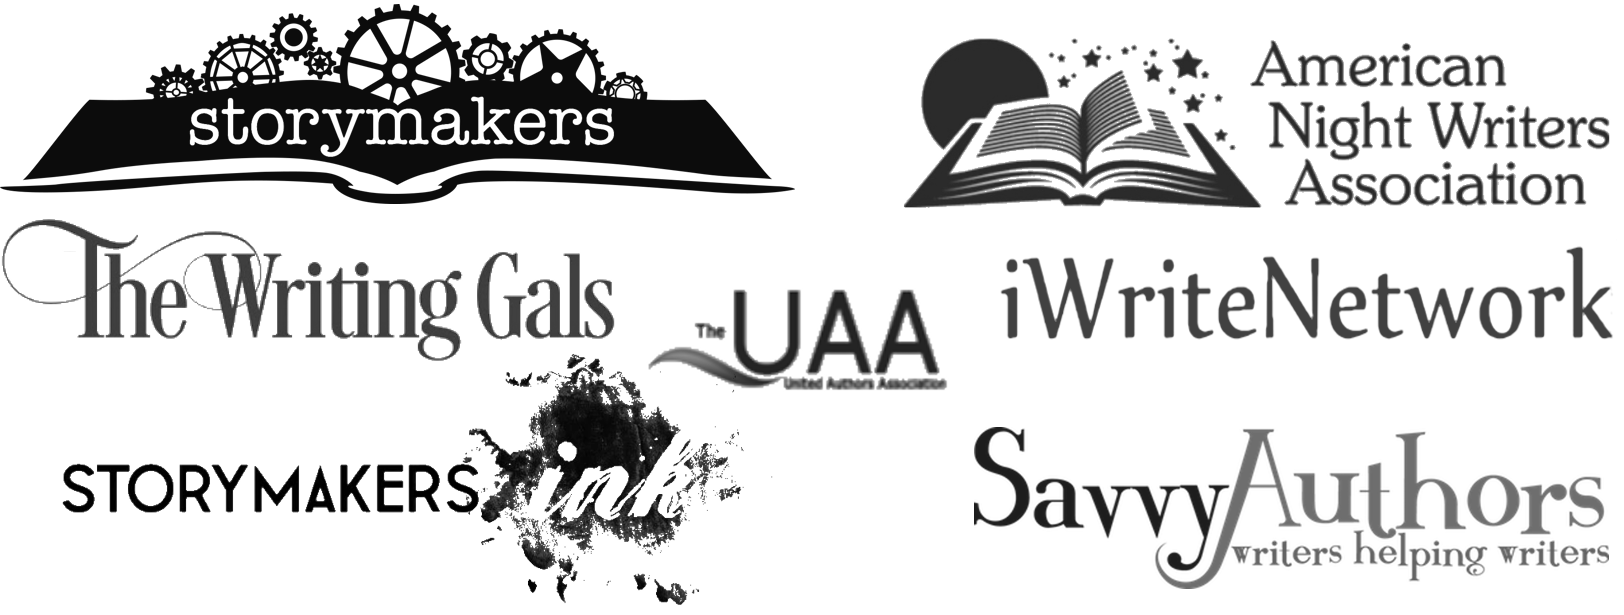 Storymakers Conference, American Night Writers Conference, The Writing Gals Conference, United Authors Association Conference, iWriteNetwork Conference, Storymakers Ink, Savvy Authors